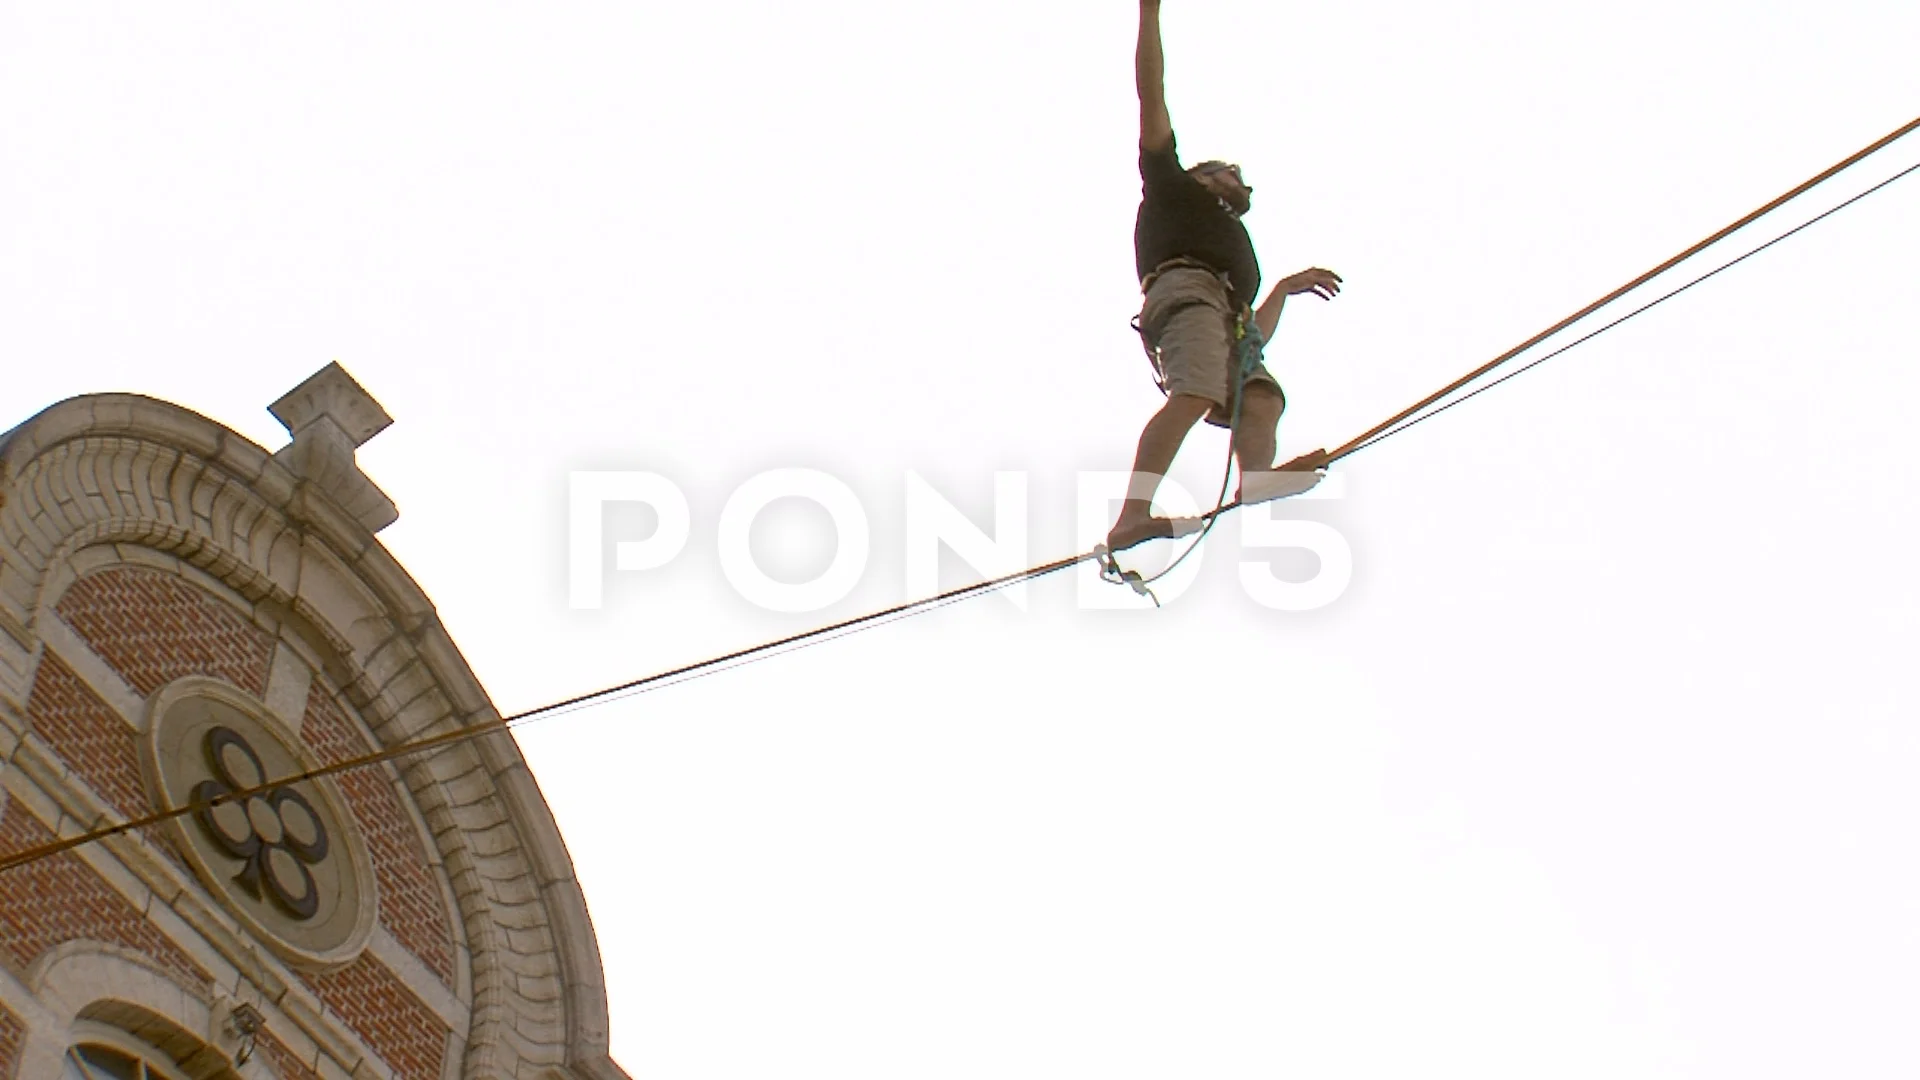 Tightrope Walker Balancing On A Rope bet, Stock Video